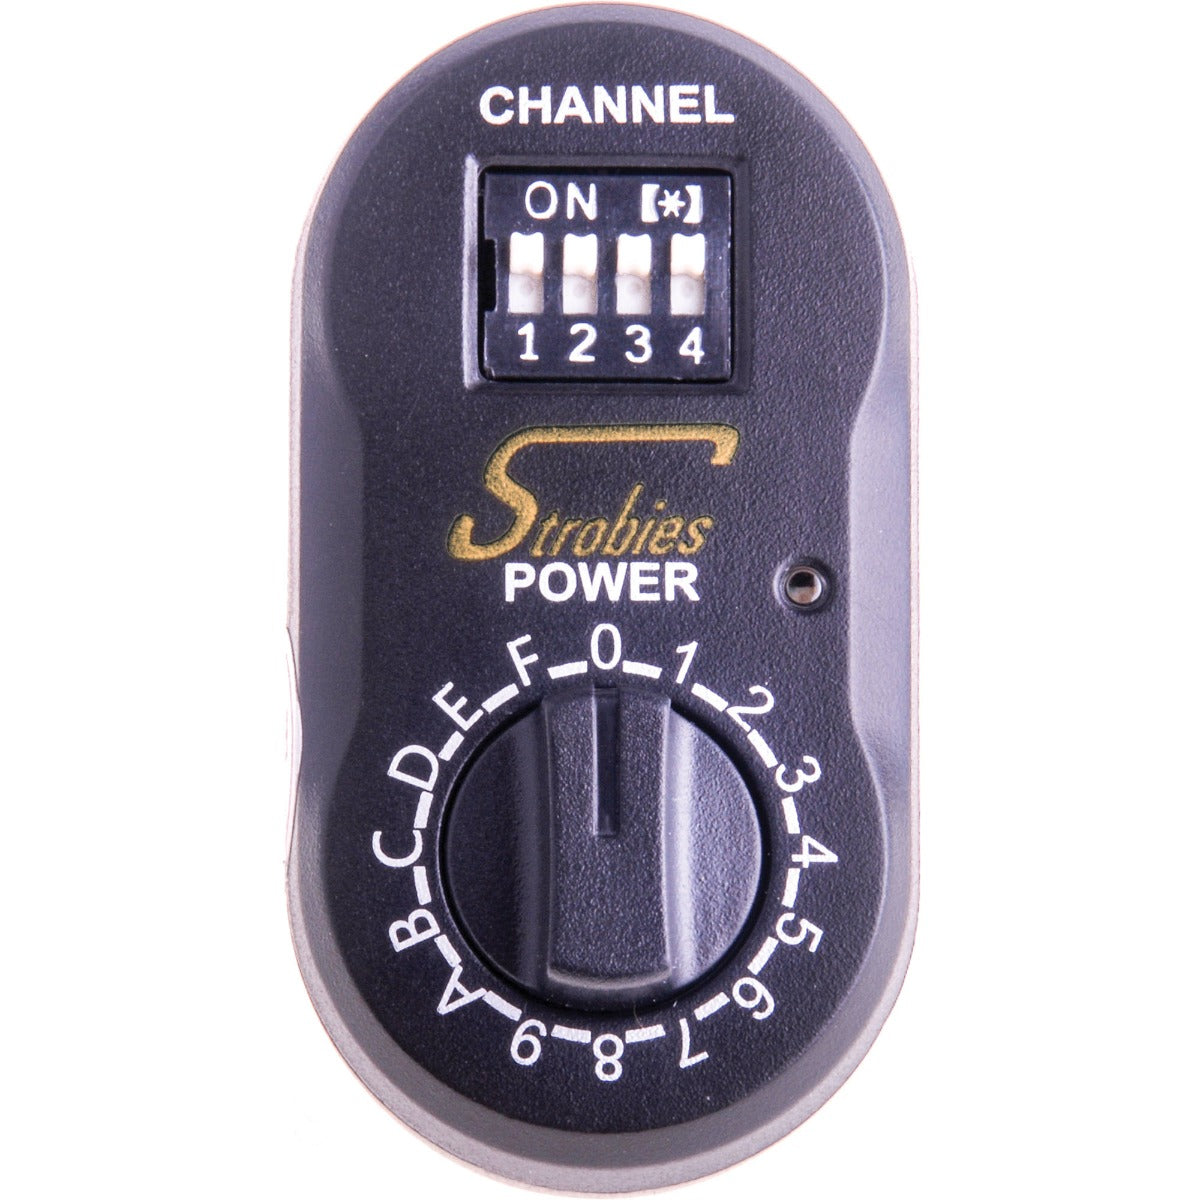 Product Image of Interfit photographic STR204 Strobies Pro-Flash receiver for One Eighty Flash